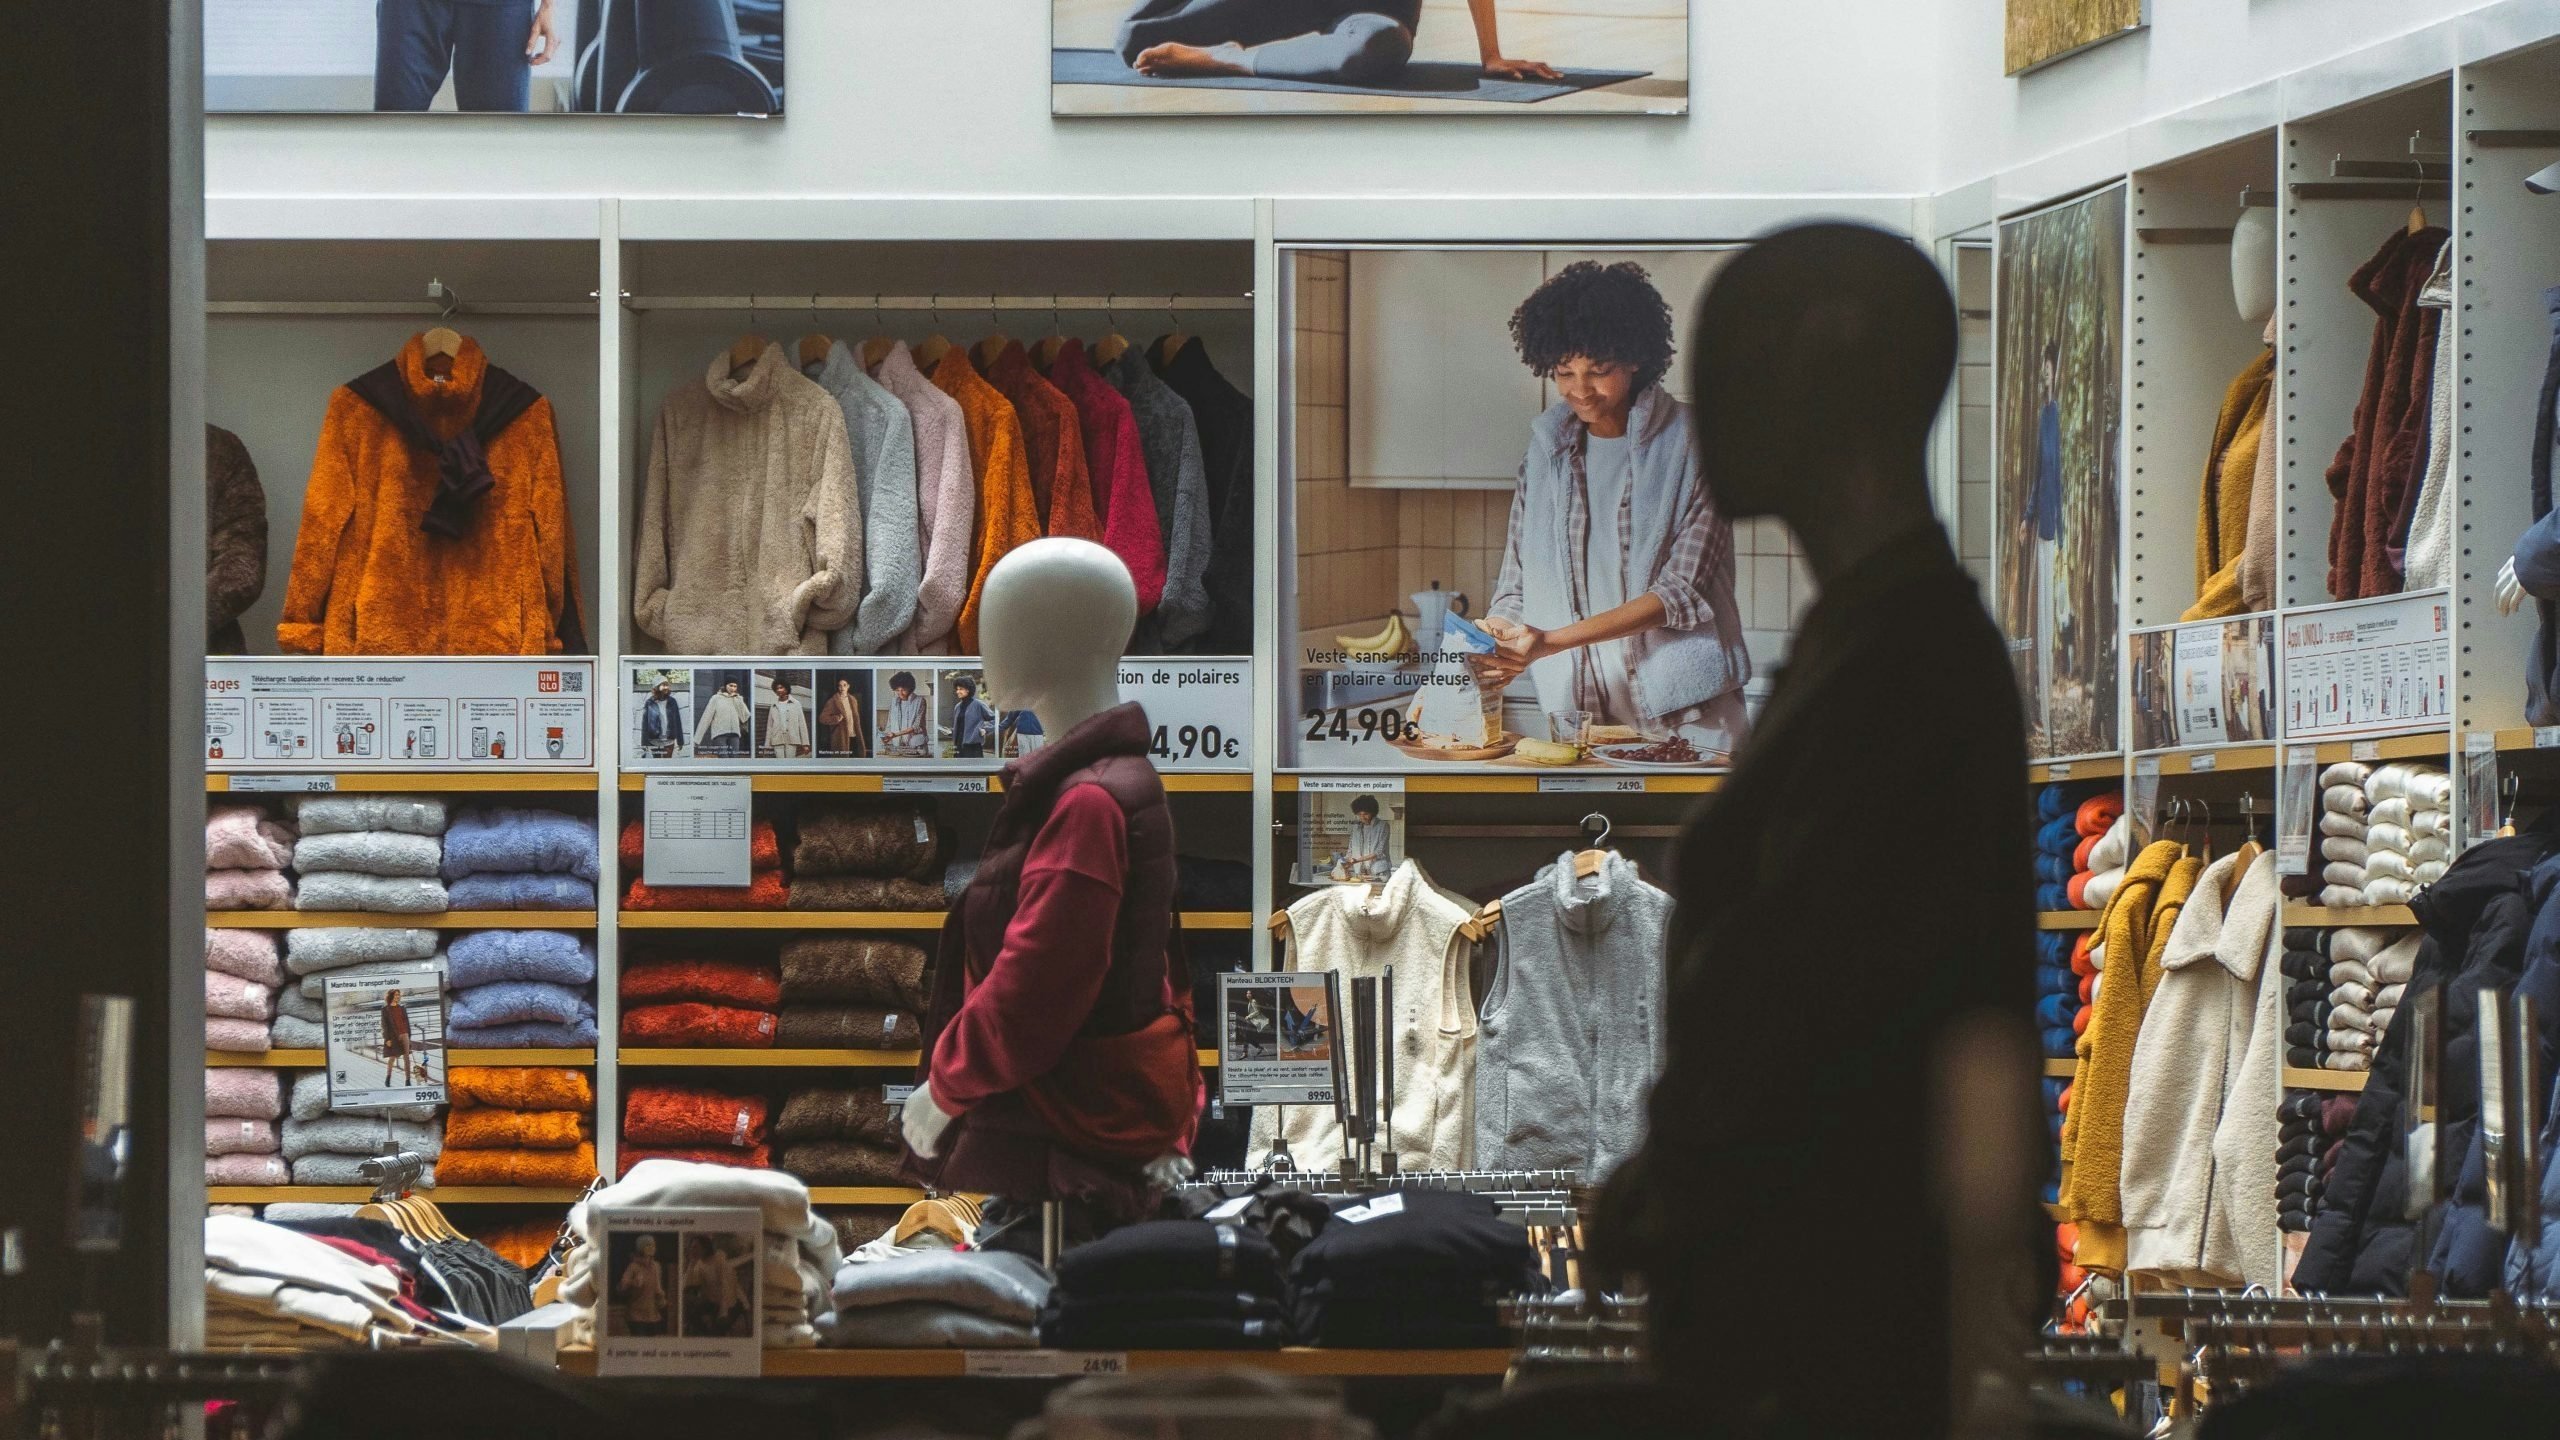 Uniqlo, Zara and Skechers are facing claims of human rights violations in China. For years, global brands have had a difficult time navigating the Xinjiang cotton controversy. Photo: Unsplash